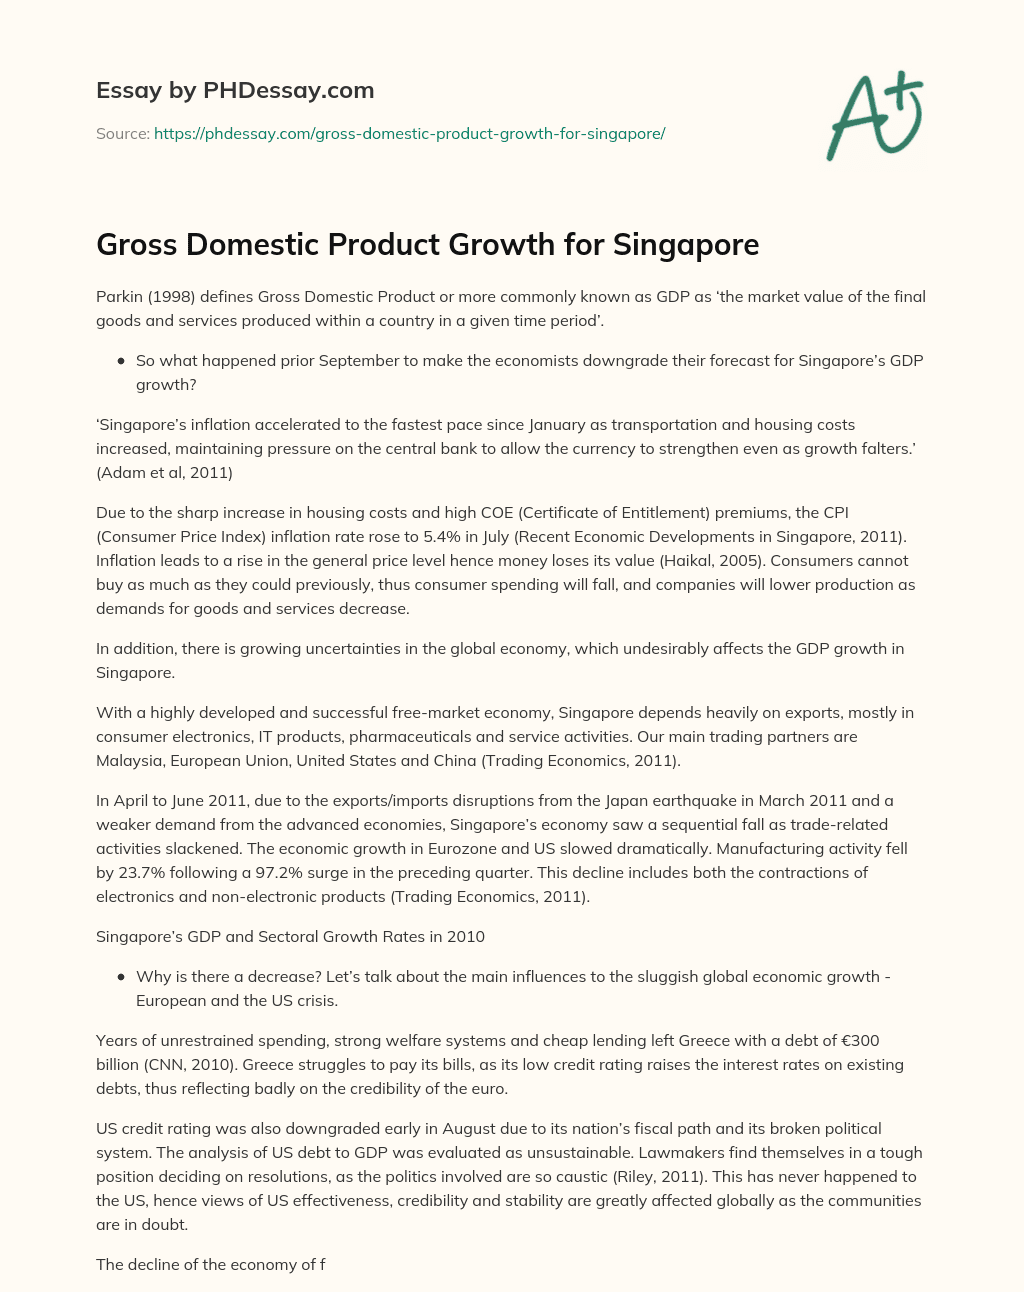 Gross Domestic Product Growth for Singapore essay